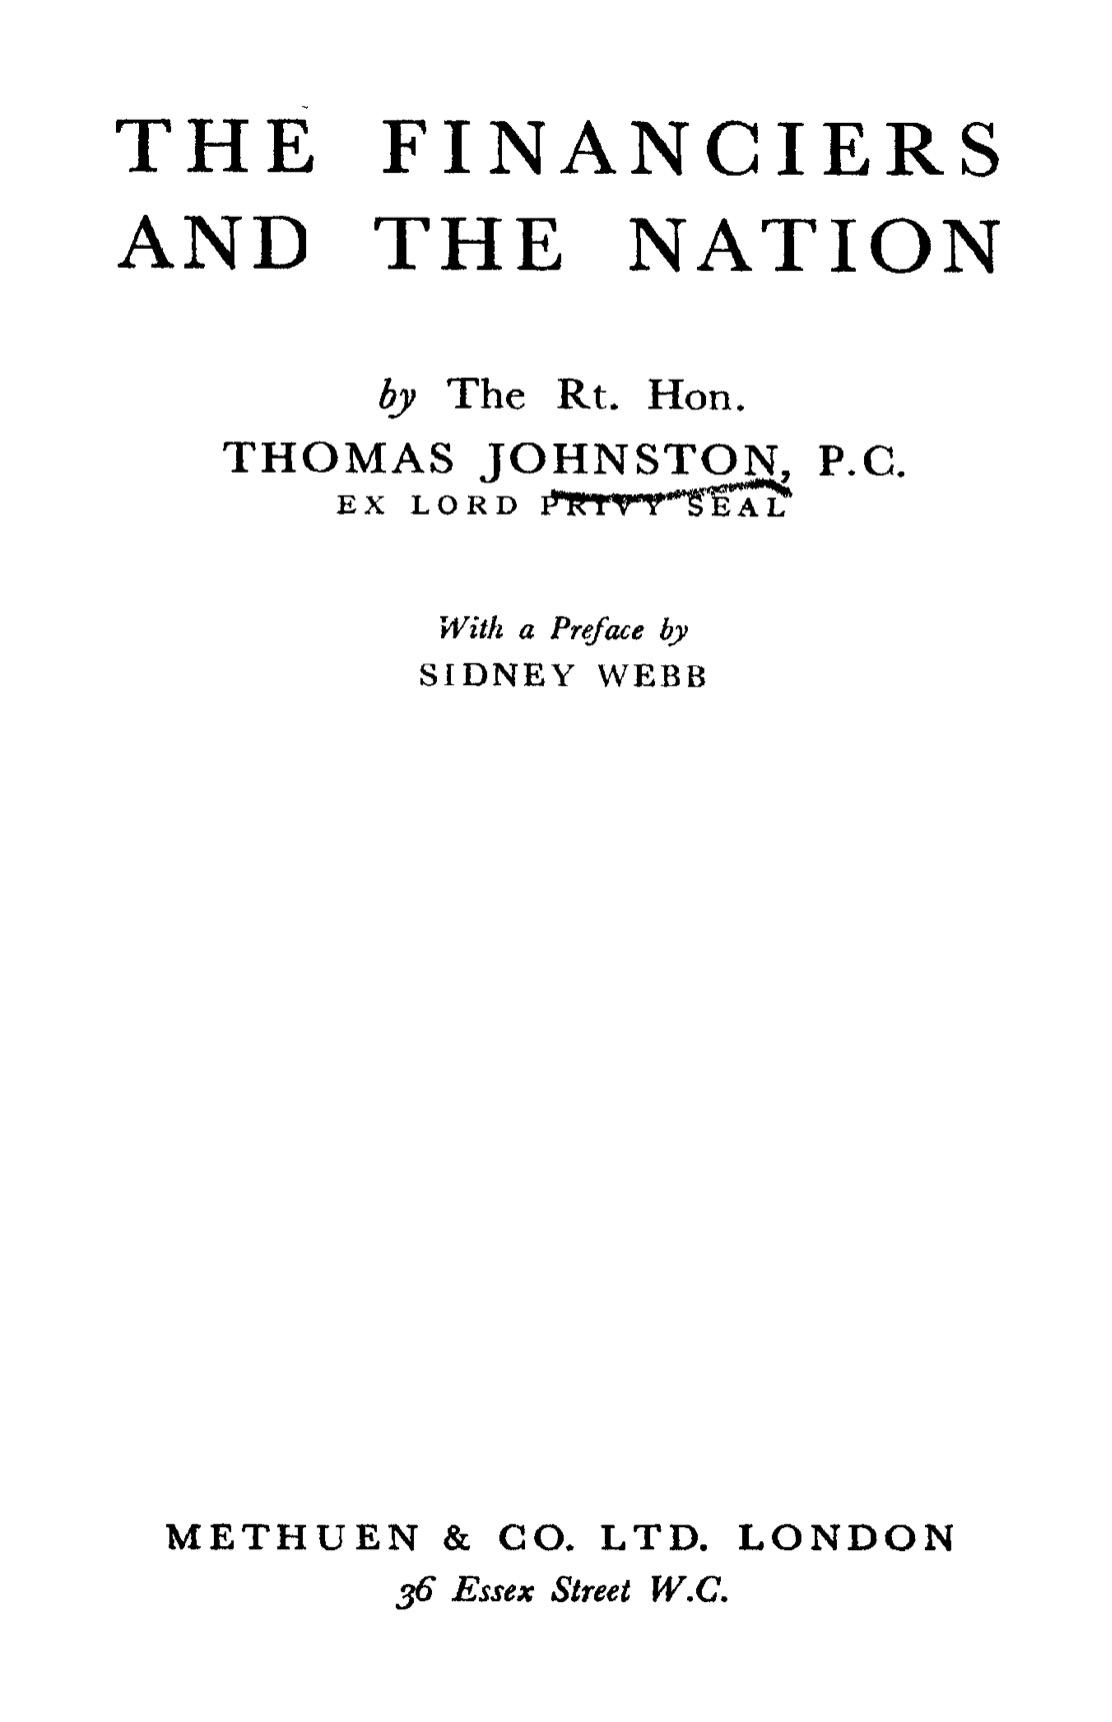 The Financiers And The Nation (1934) by Thomas Johnston & Sidney Webb